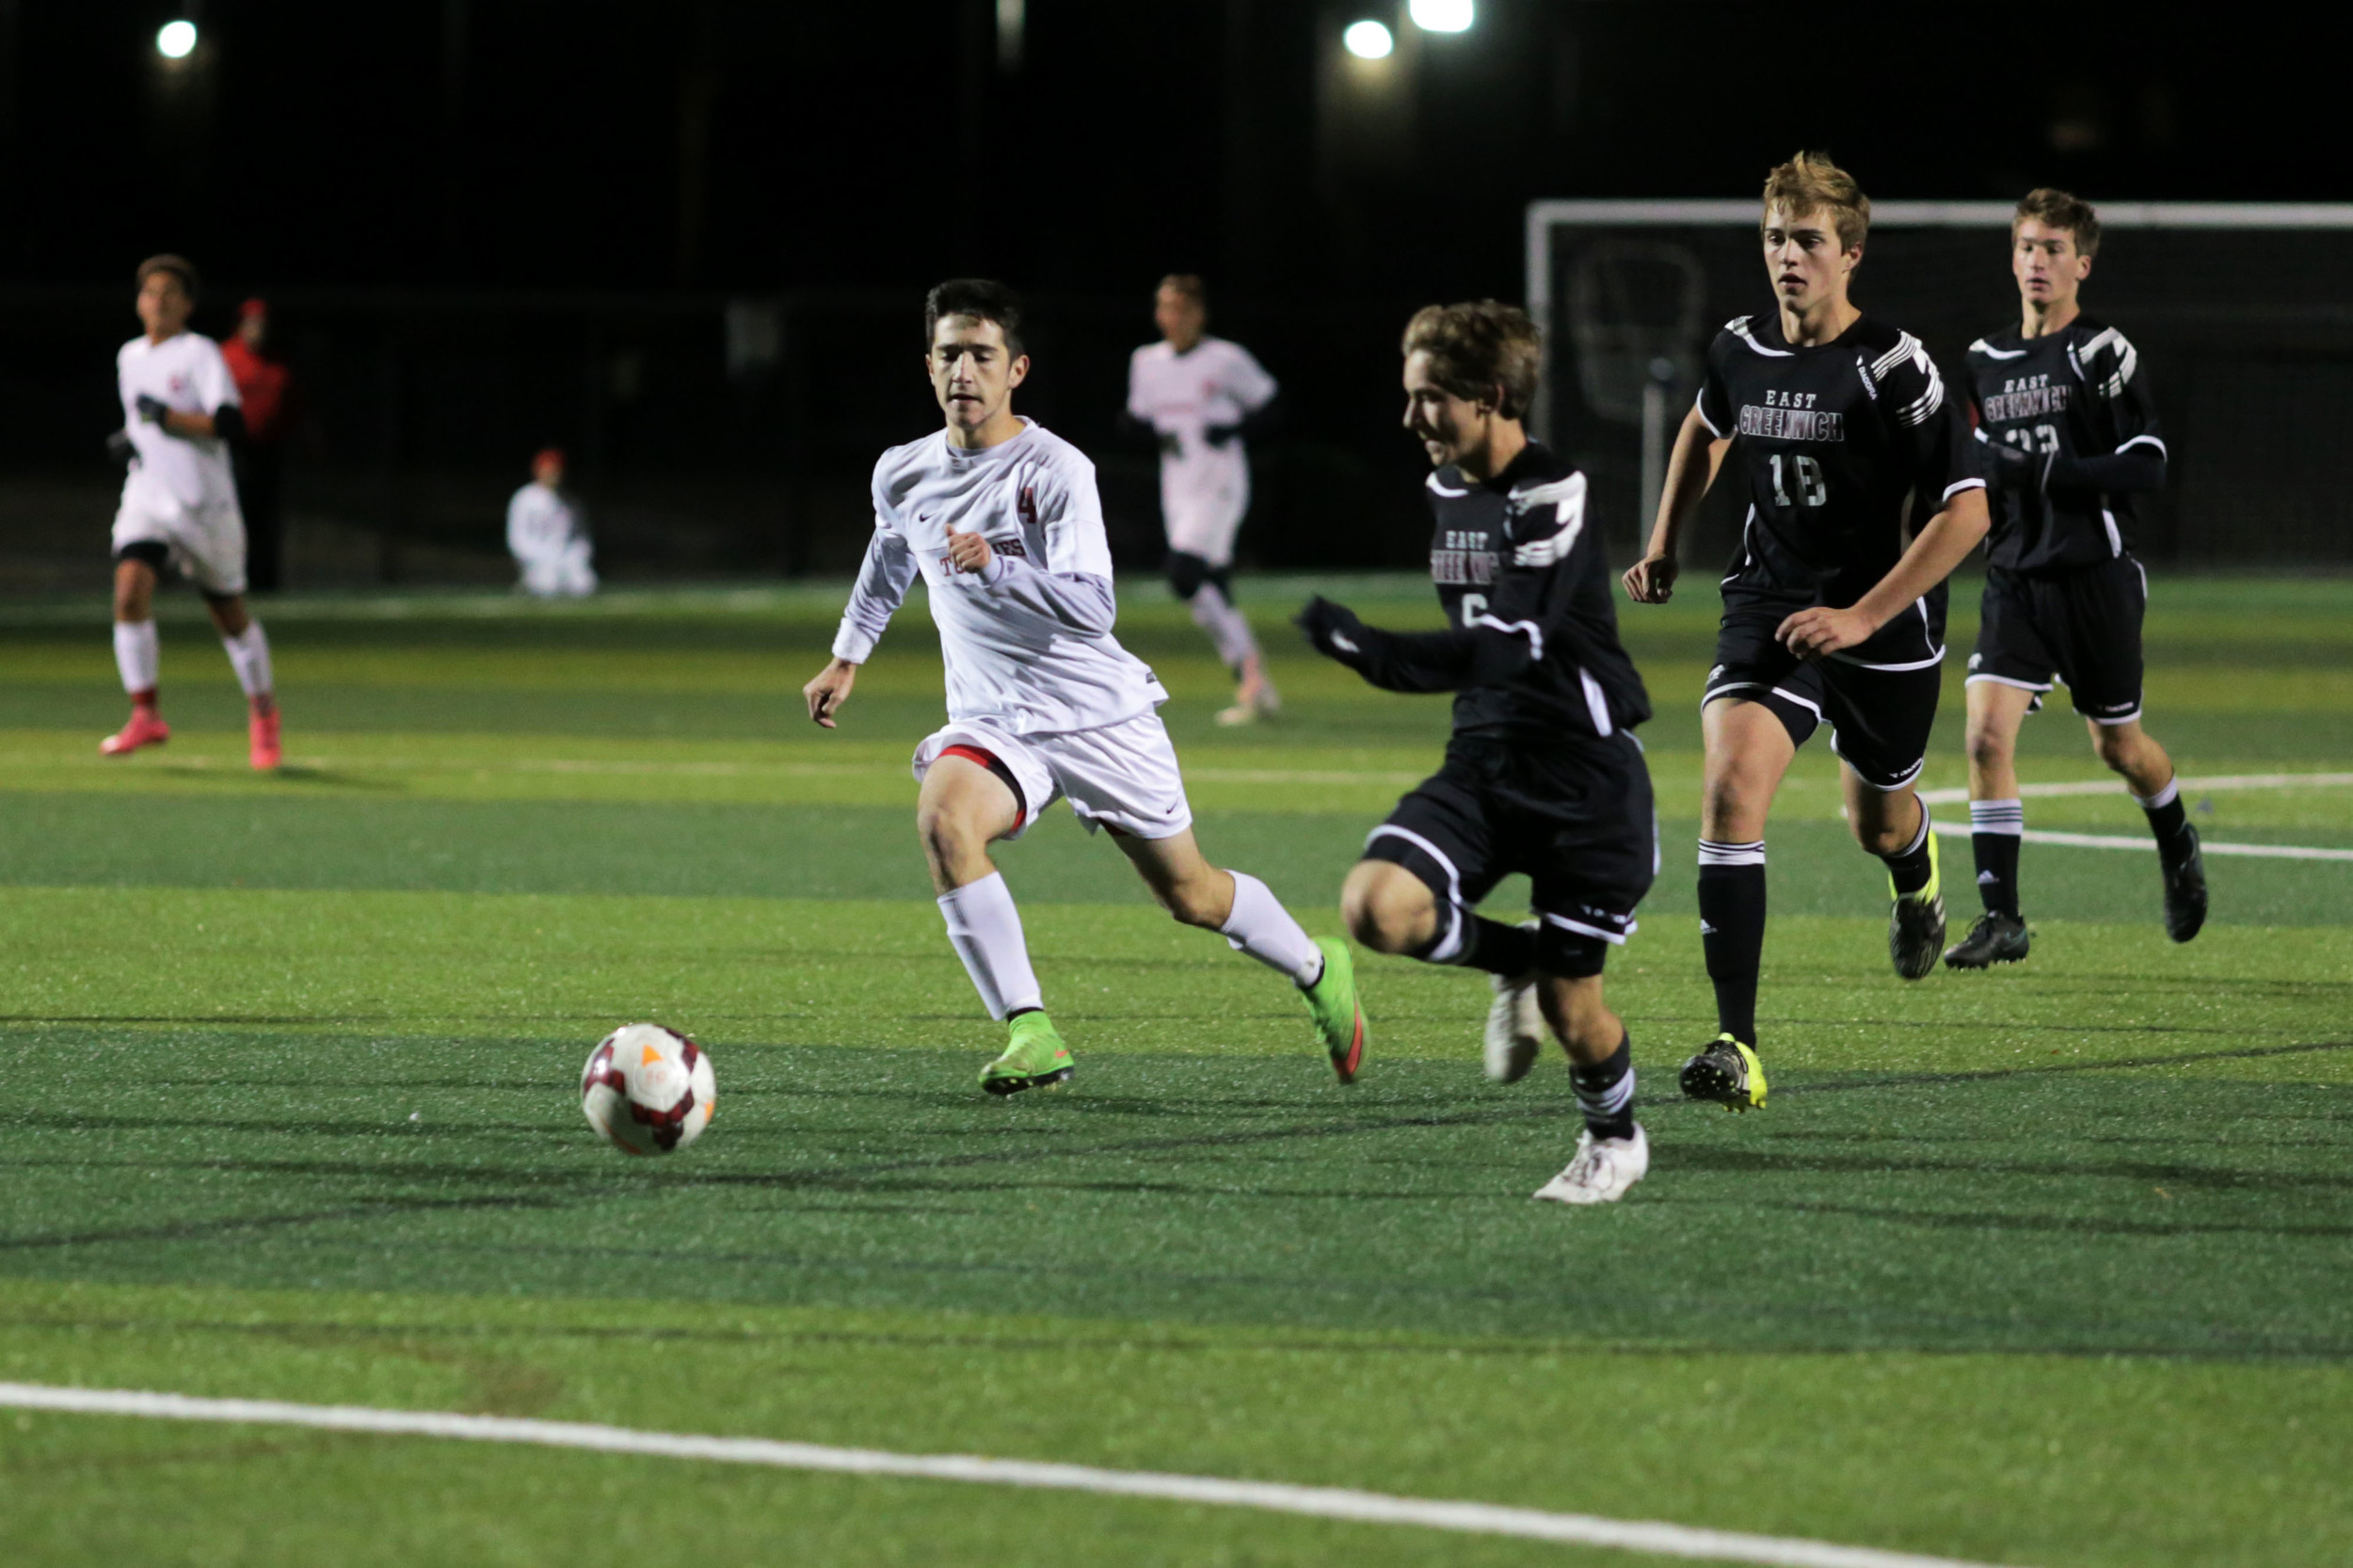 East Providence's Nathan Bento outruns East Greenwich defenders to take a shot on net.